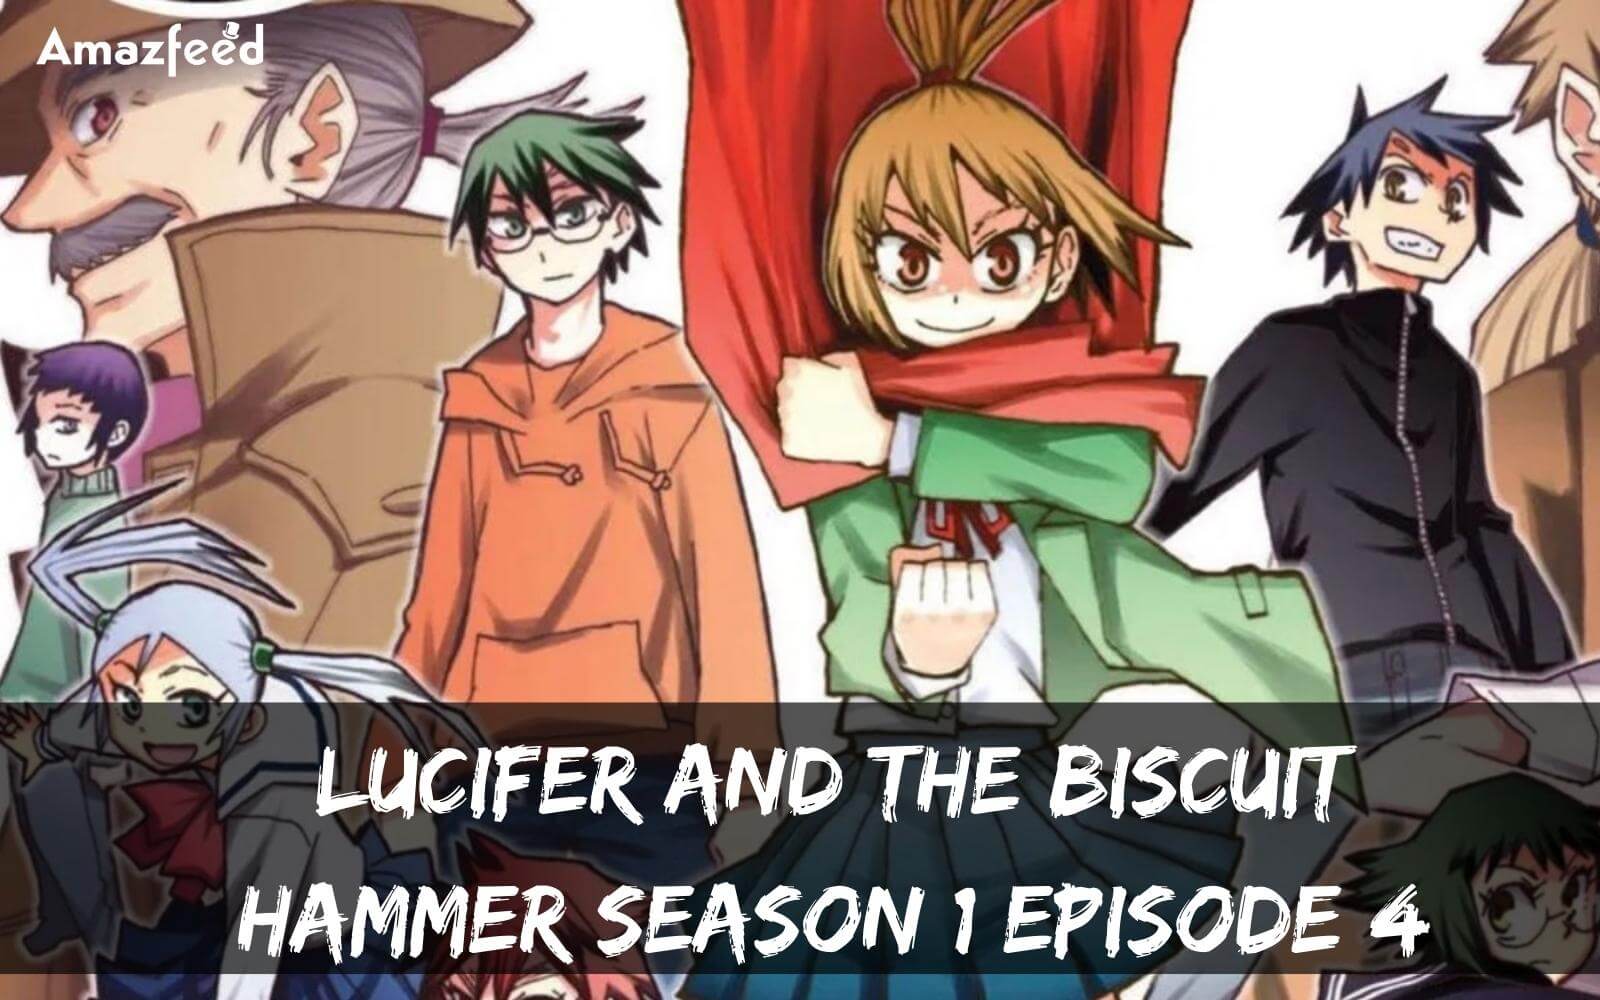 Lucifer And The Biscuit Hammer Season 1 Episode 4 ⇒ Countdown, Release Date, Spoiler, Cast & Trailer